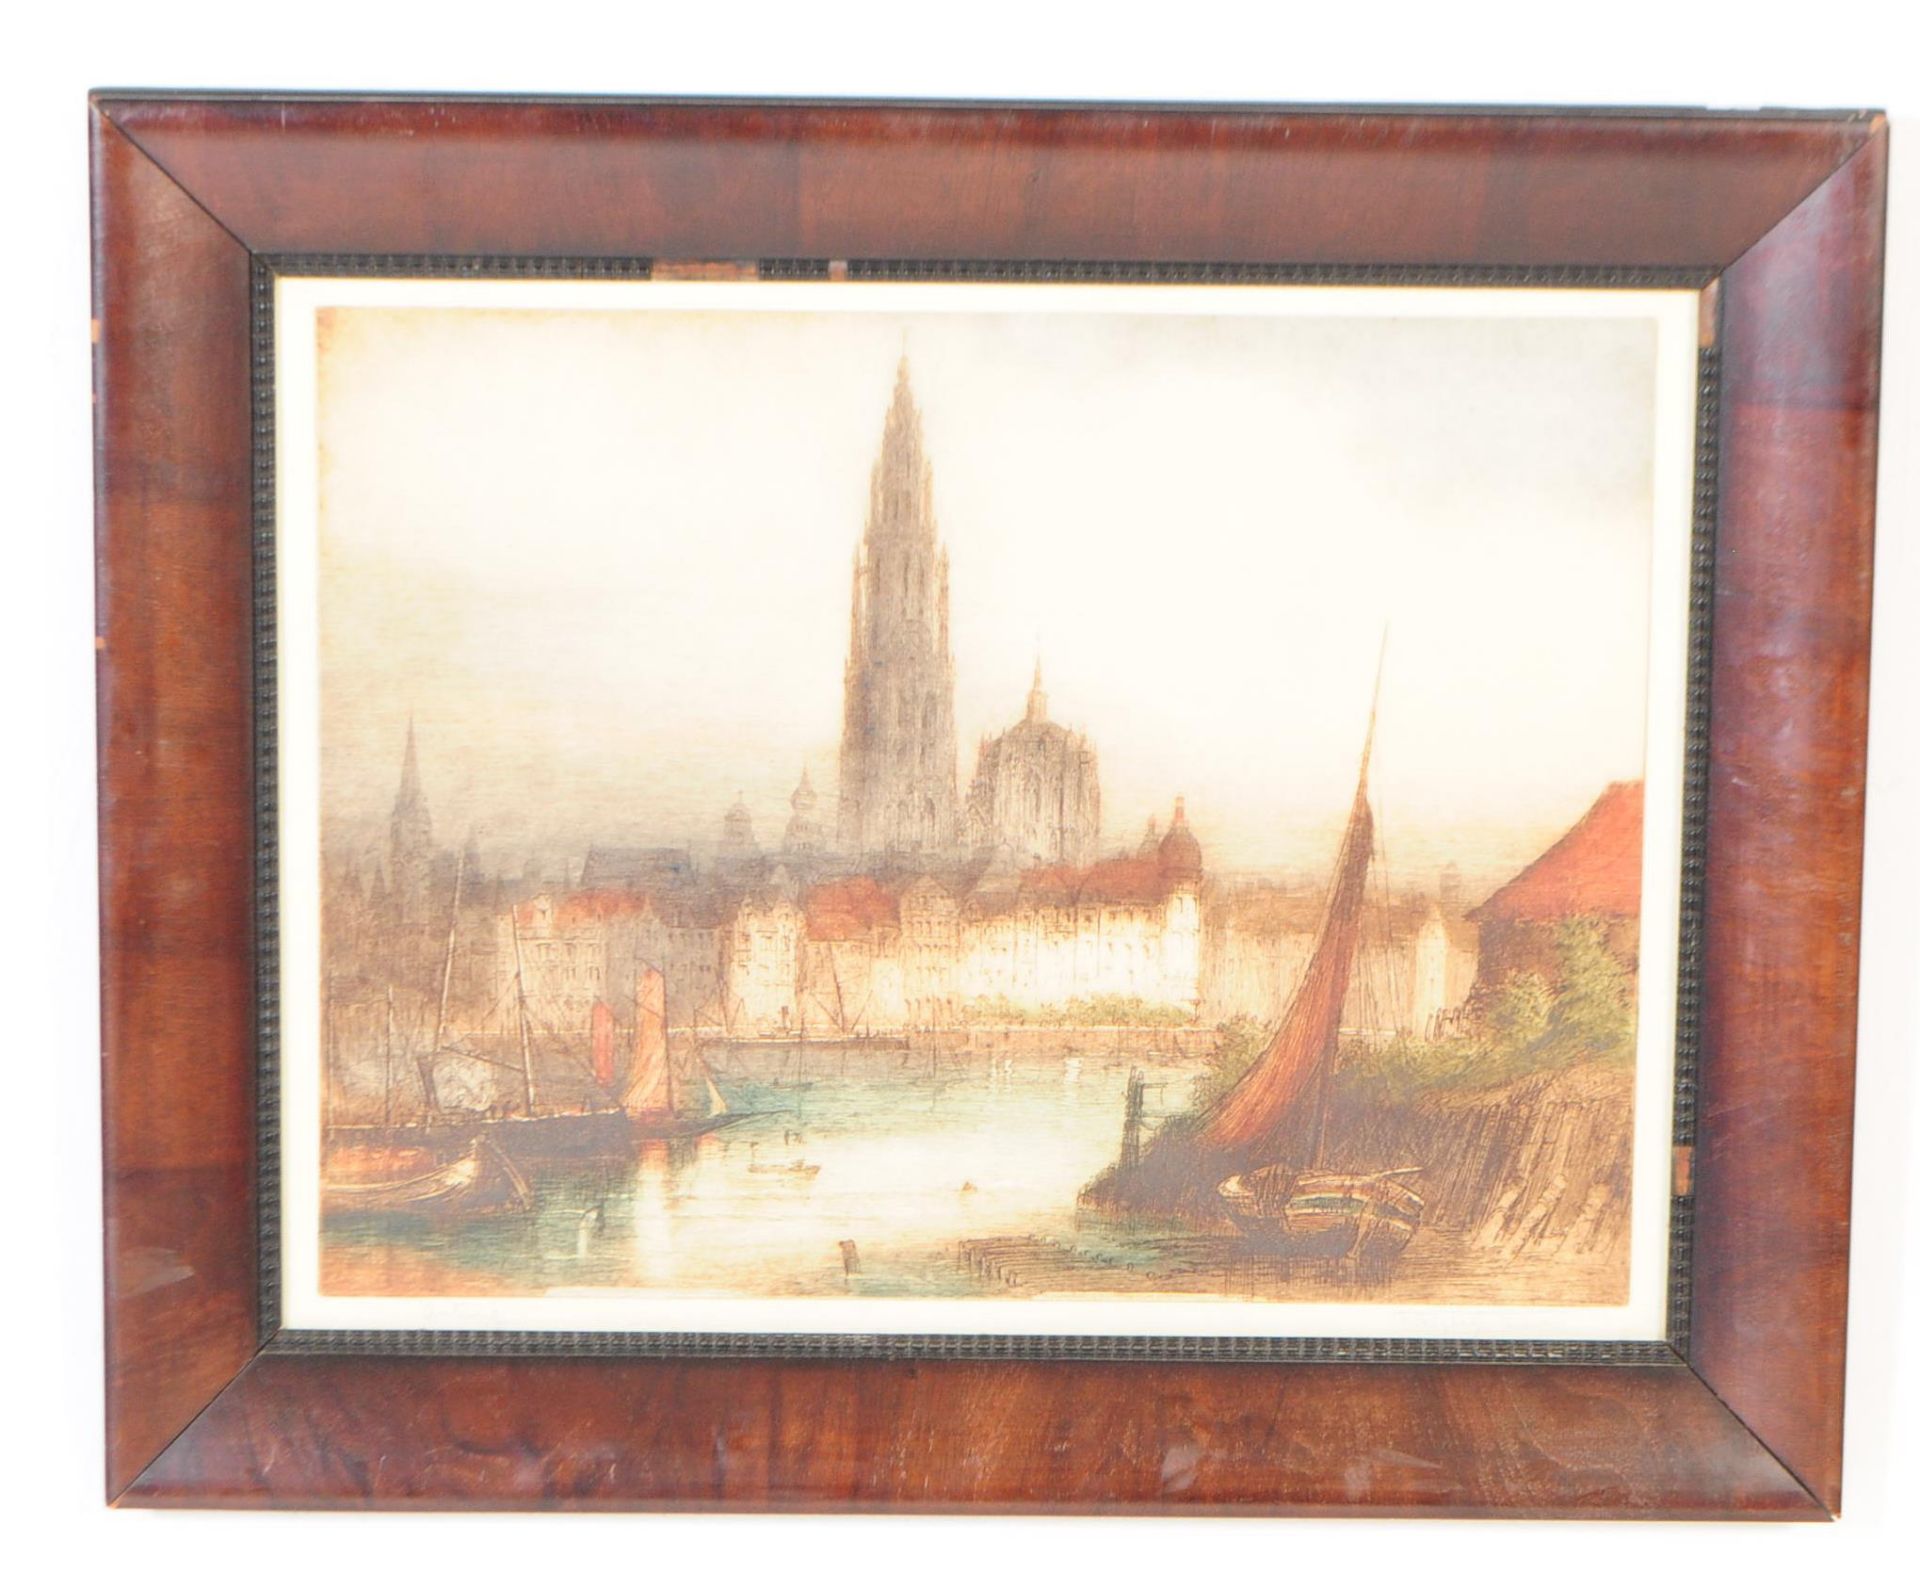 EARLY 20TH CENTURY 'ANTWERP' ETCHING BY JAMES ALPHEGE BREWER